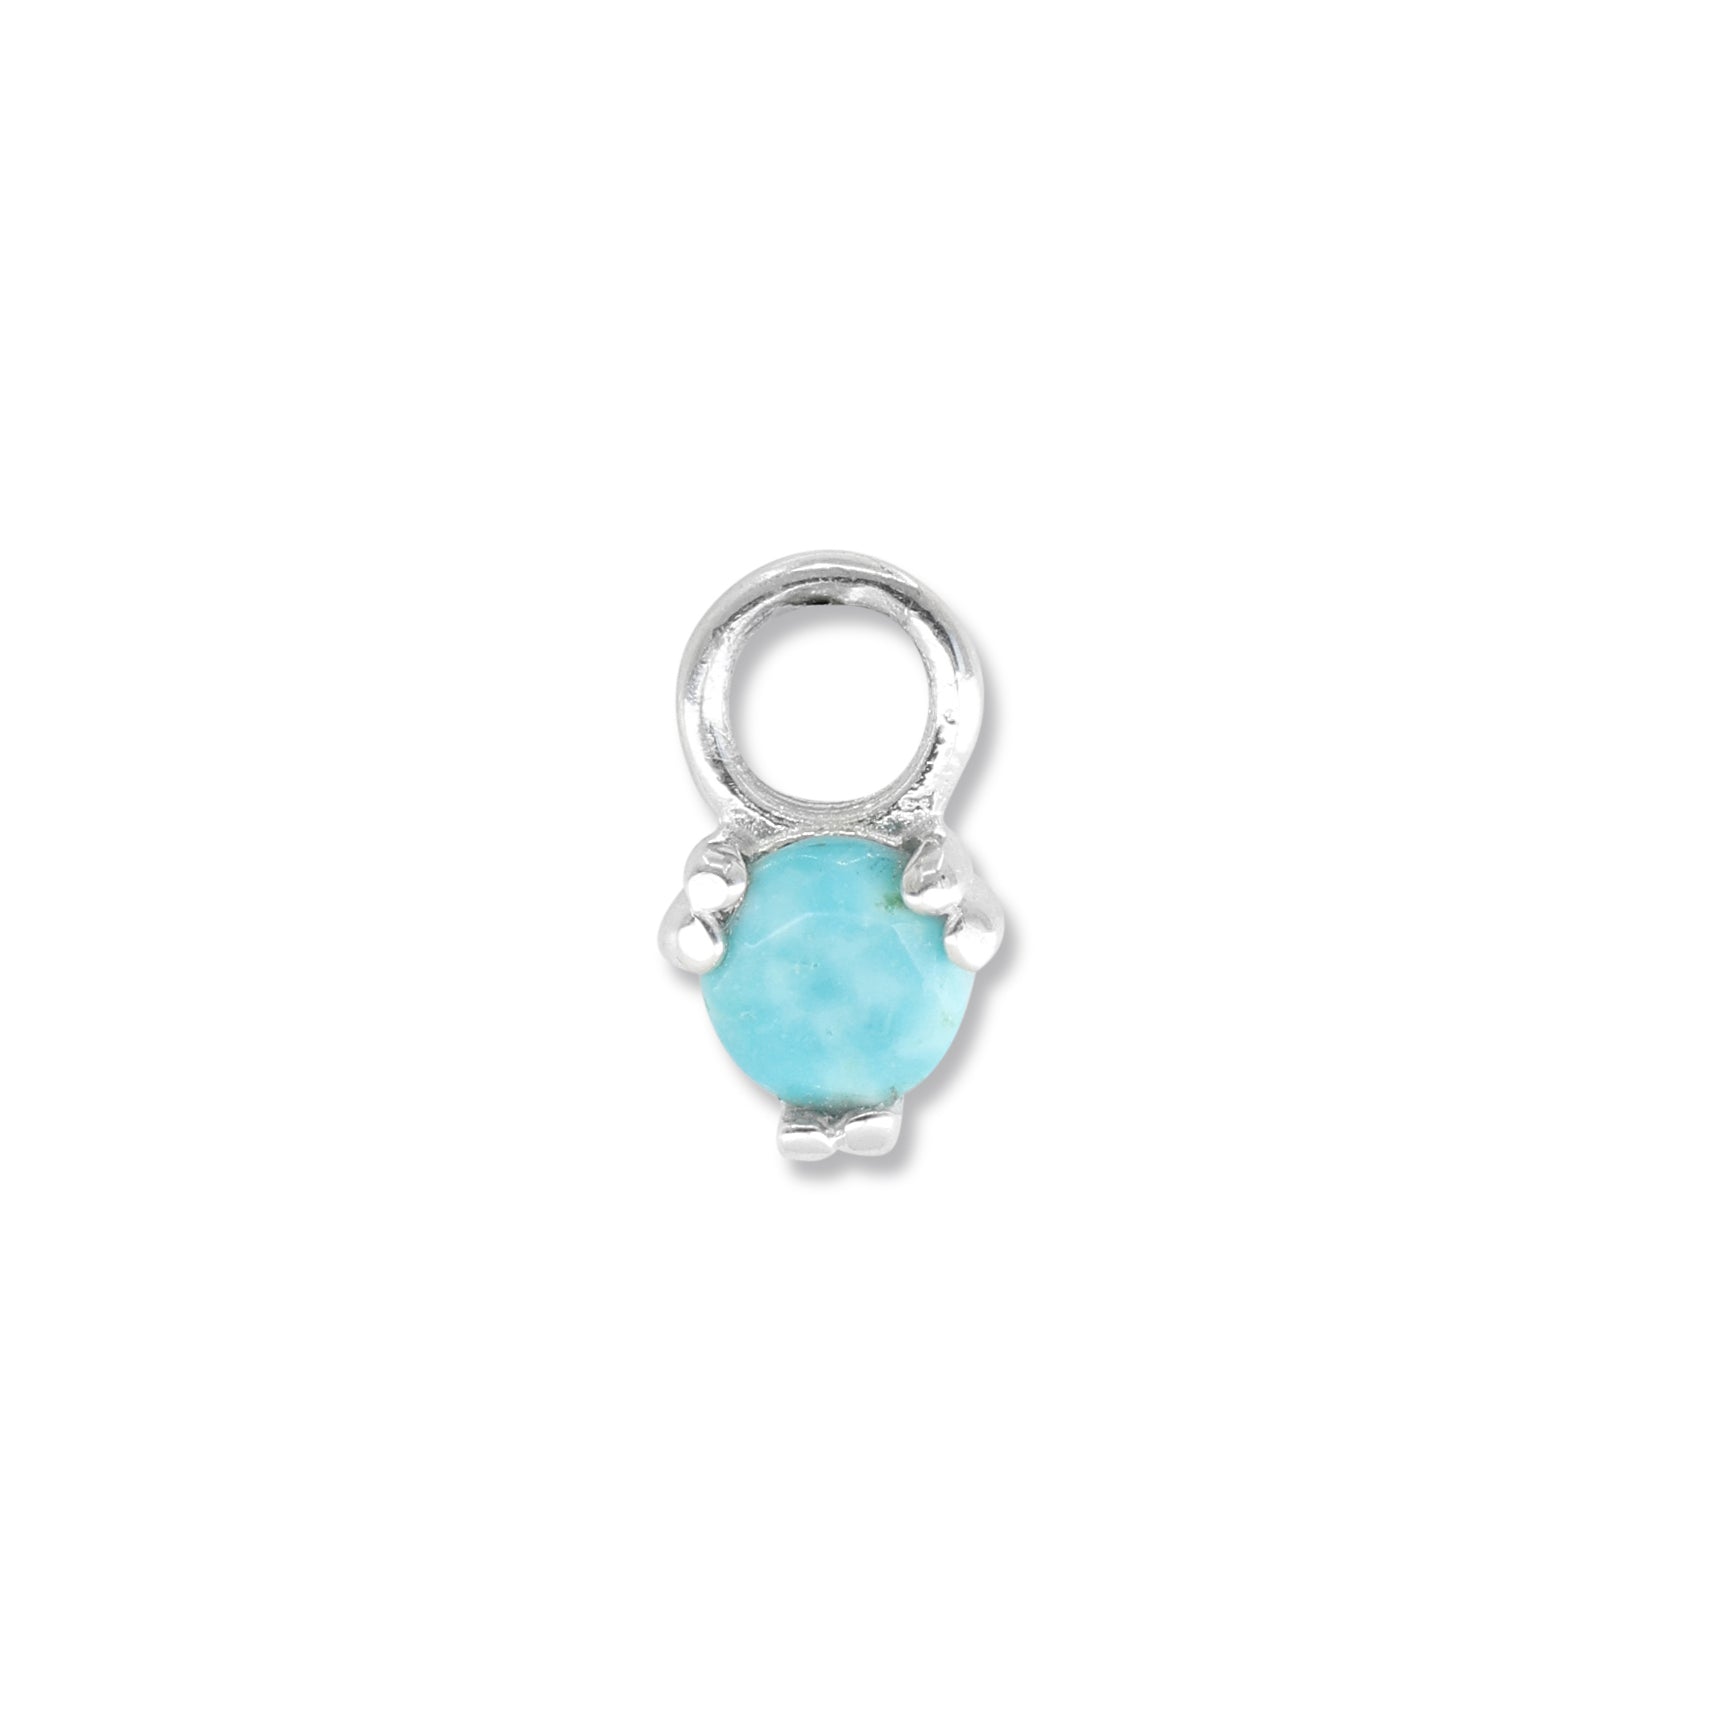 Orb Turquoise Silver Charm